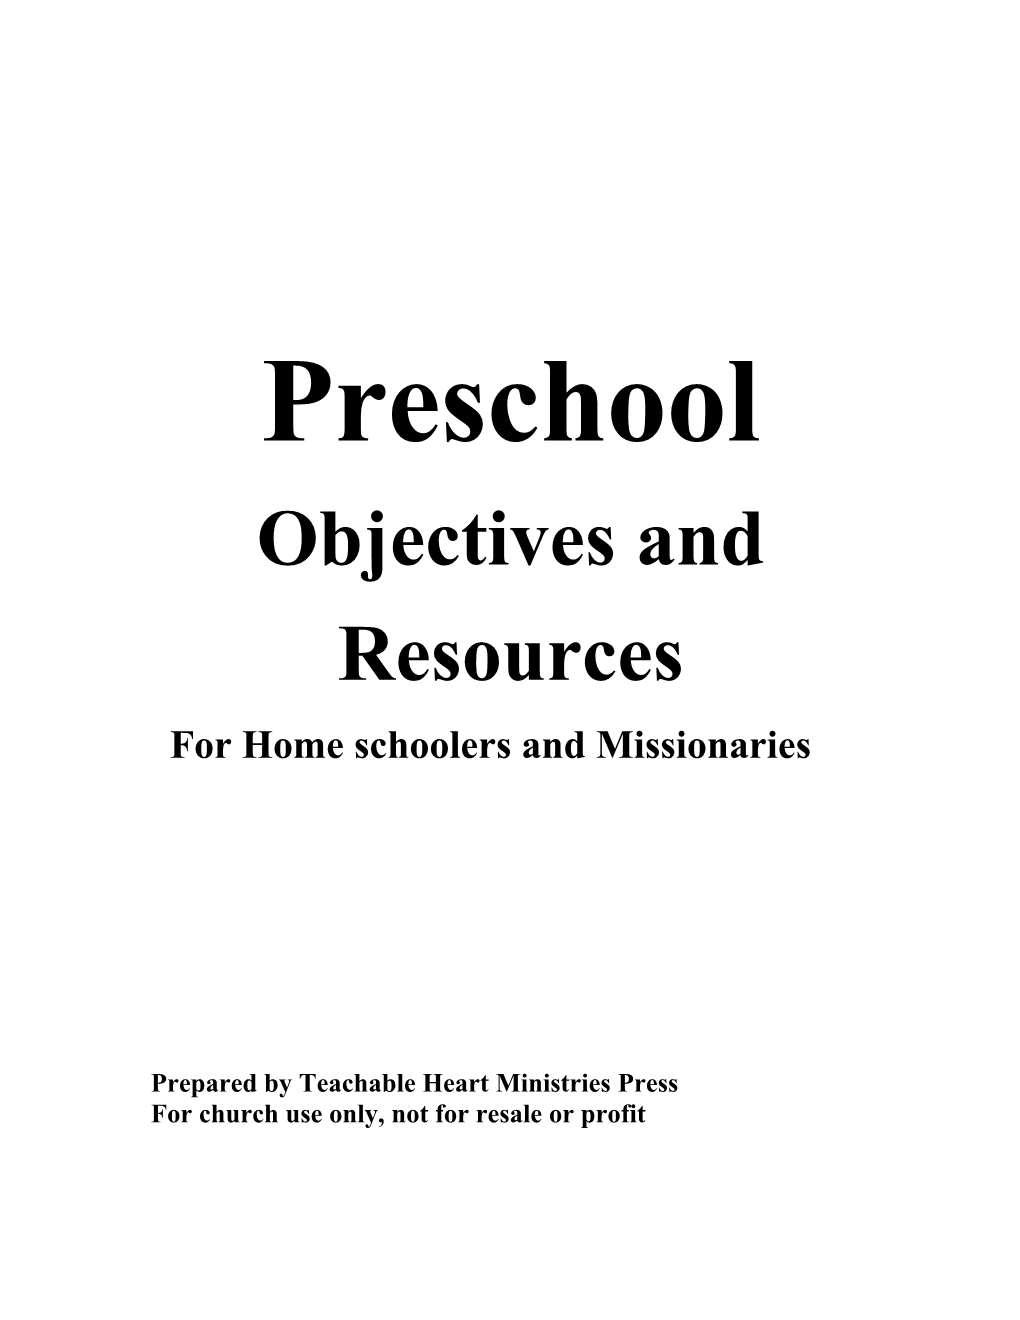 Our Daily Bread School Preschool Outcomes Check List Name:______ As Child Meets the Objectives